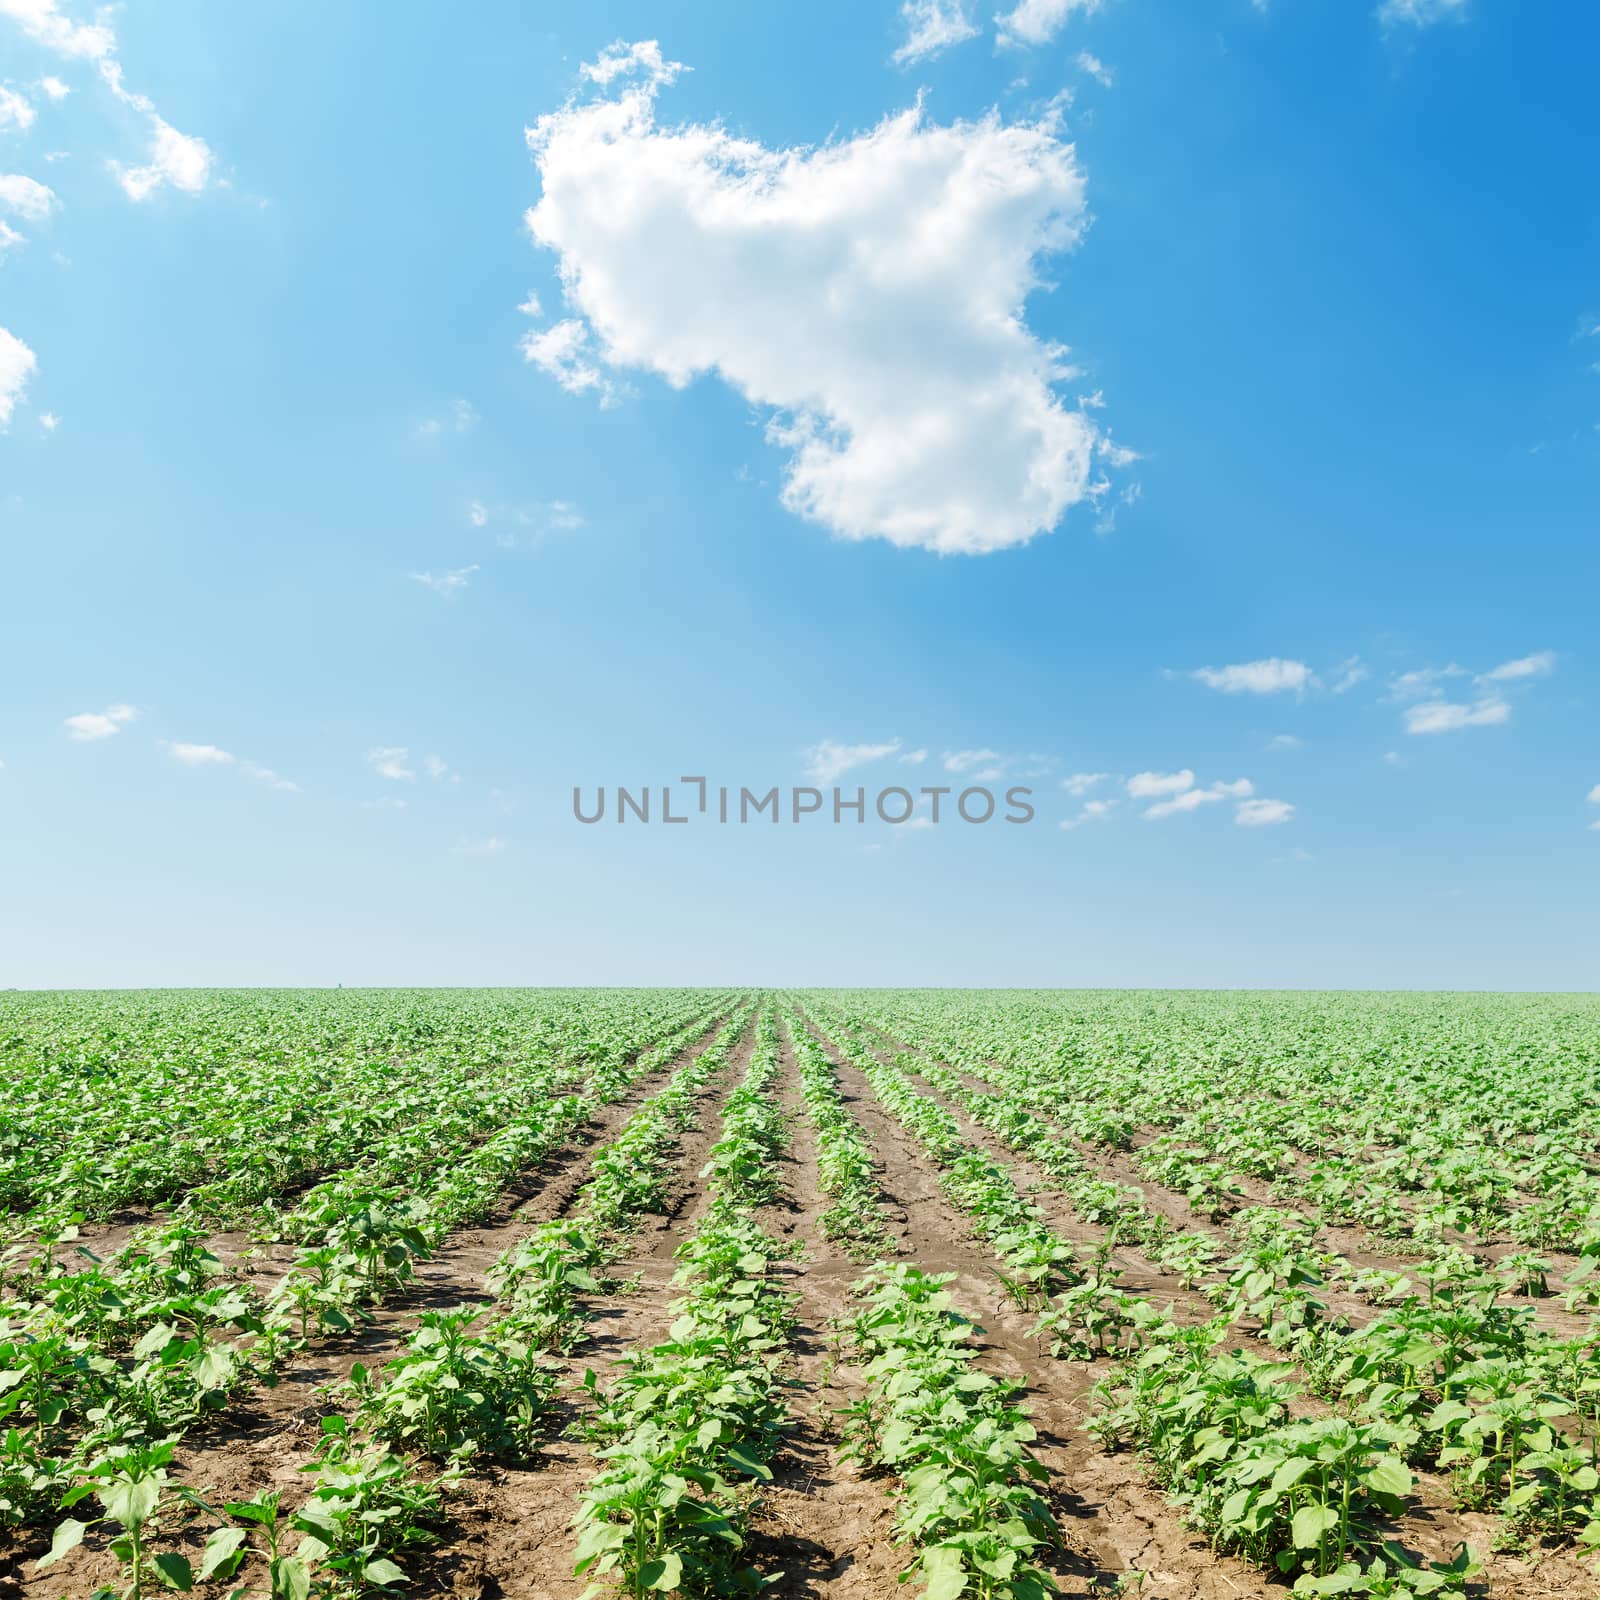 cloud in blue sky over field with green sunflowers